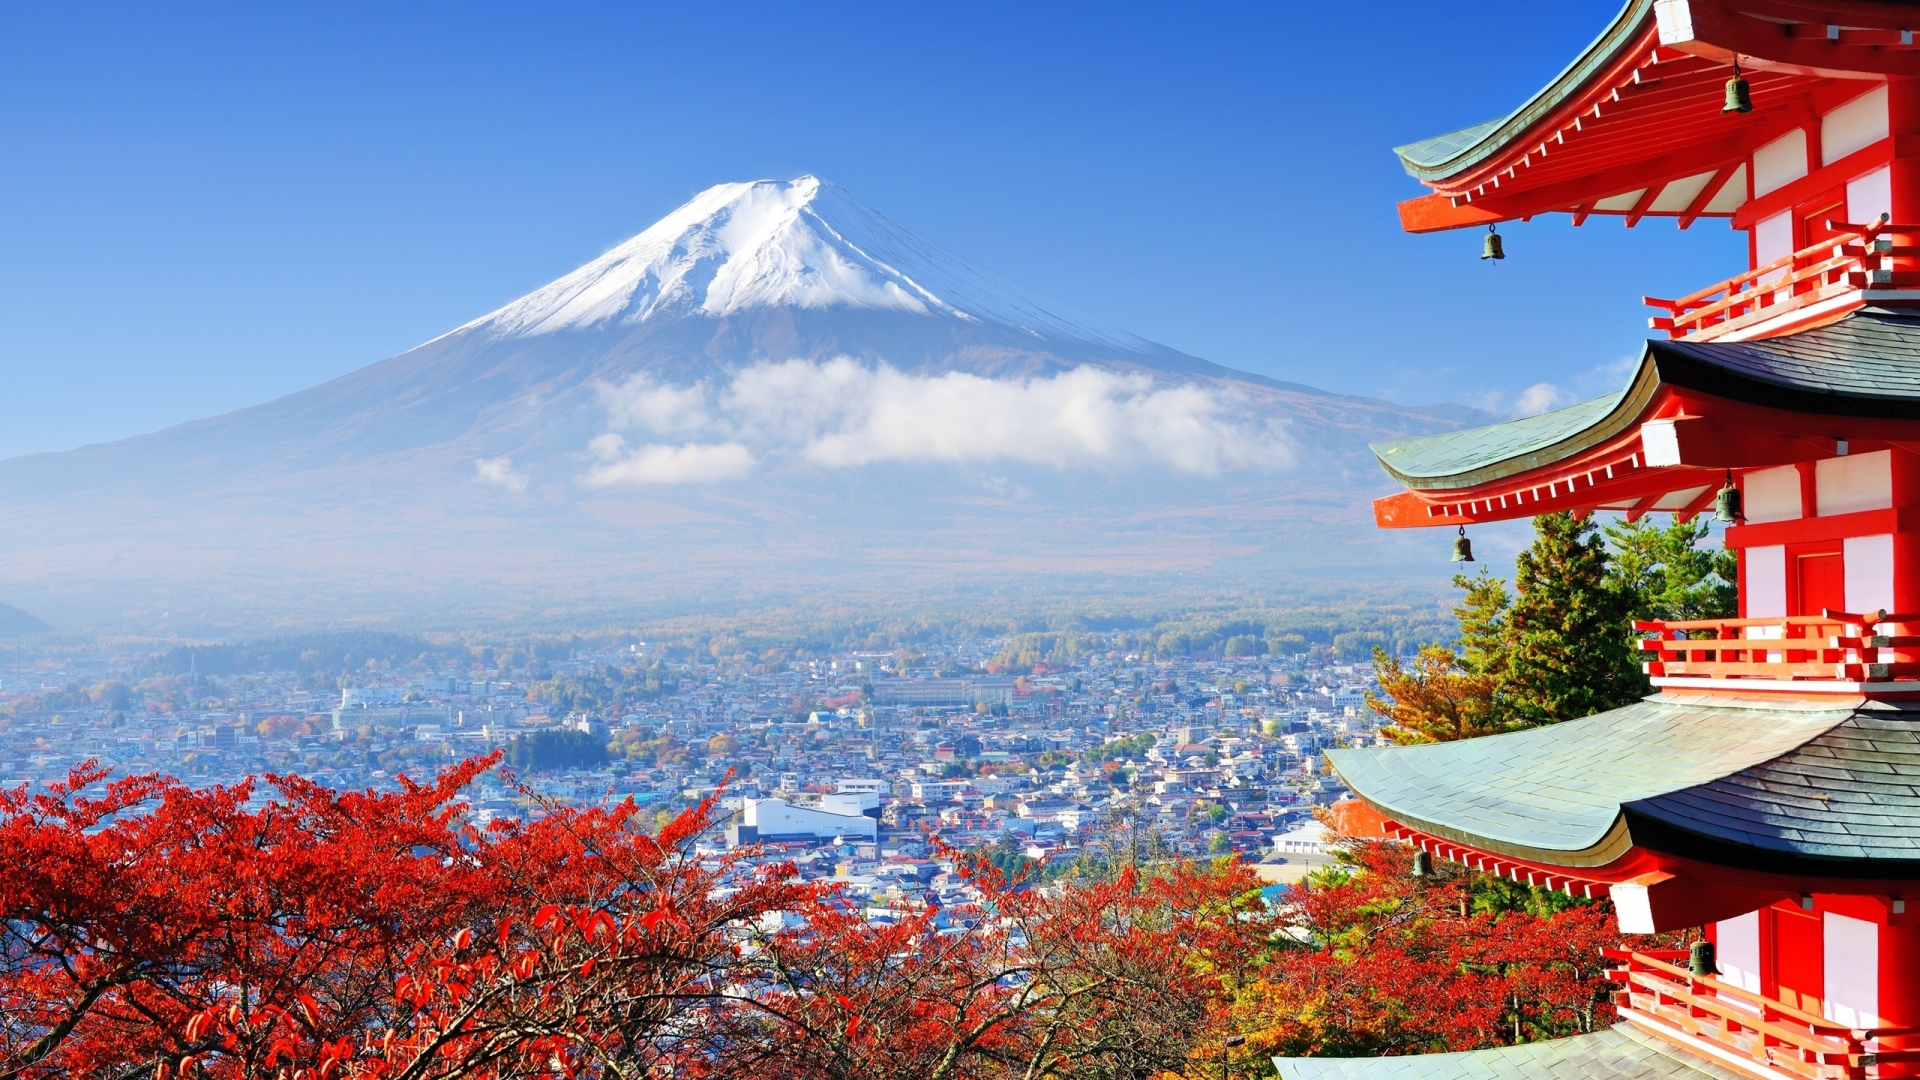 Fuji Mount in Japan for 1920 x 1080 HDTV 1080p resolution